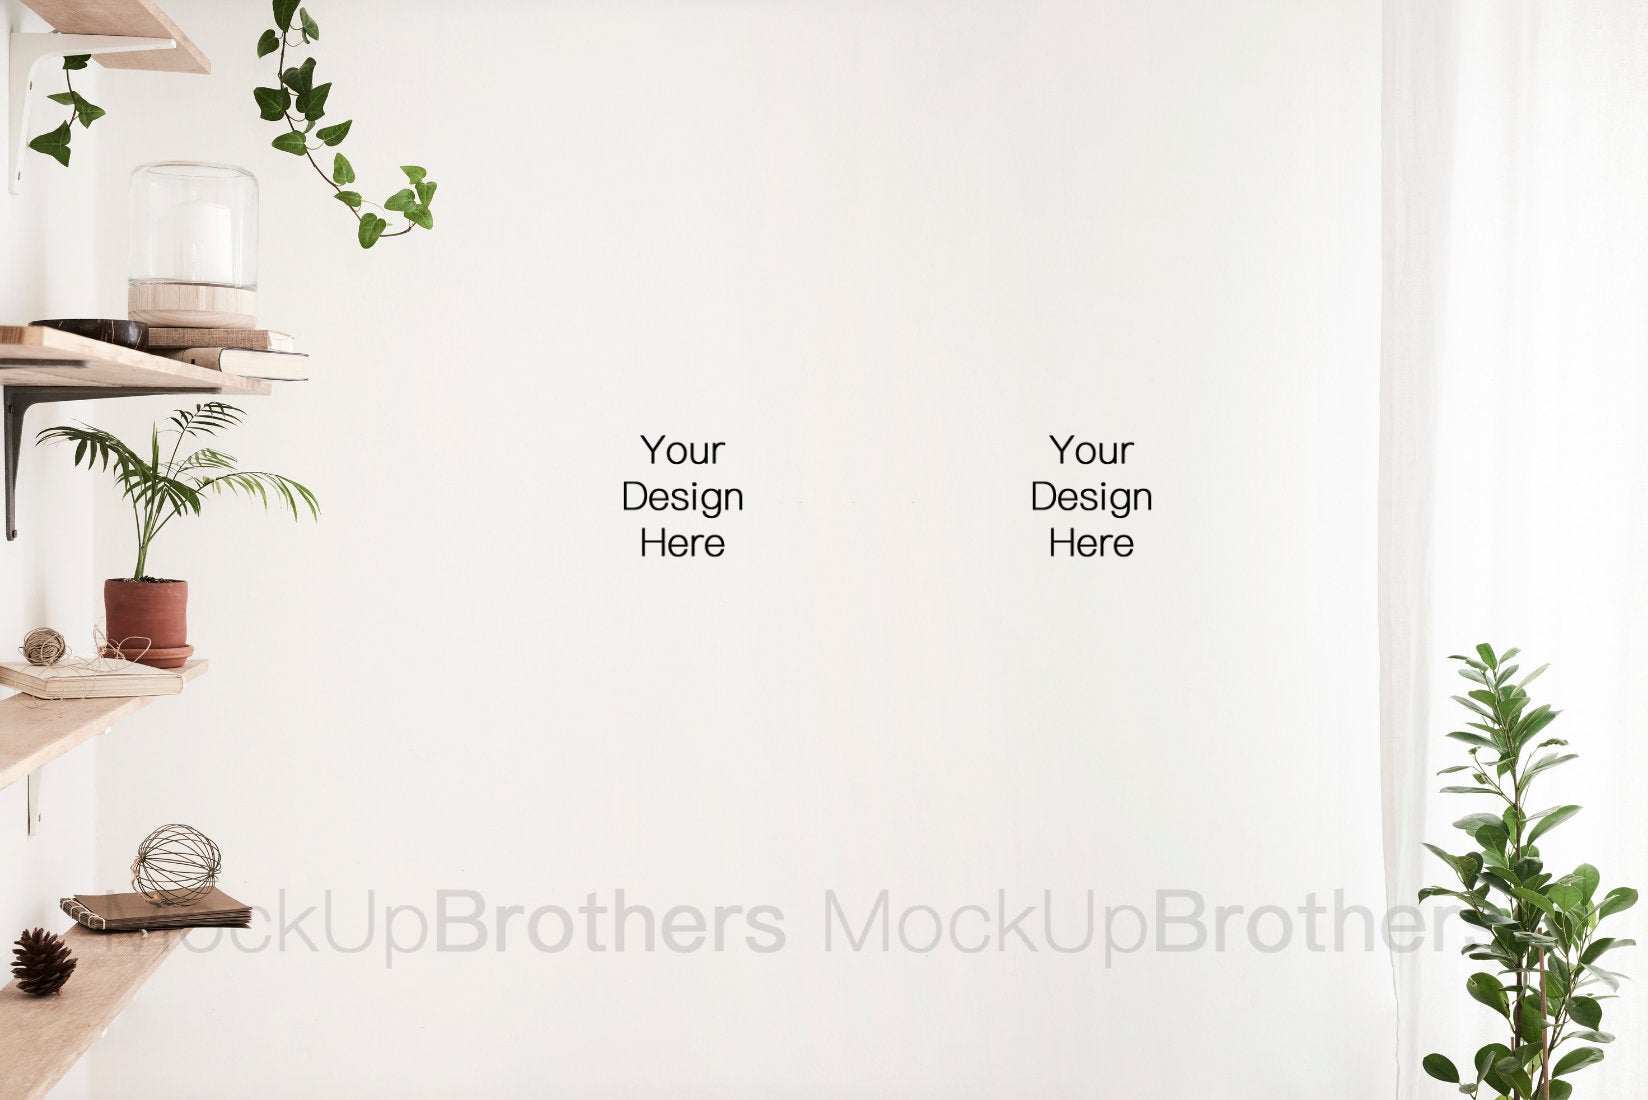 Wall stock photo by Mockup brothers